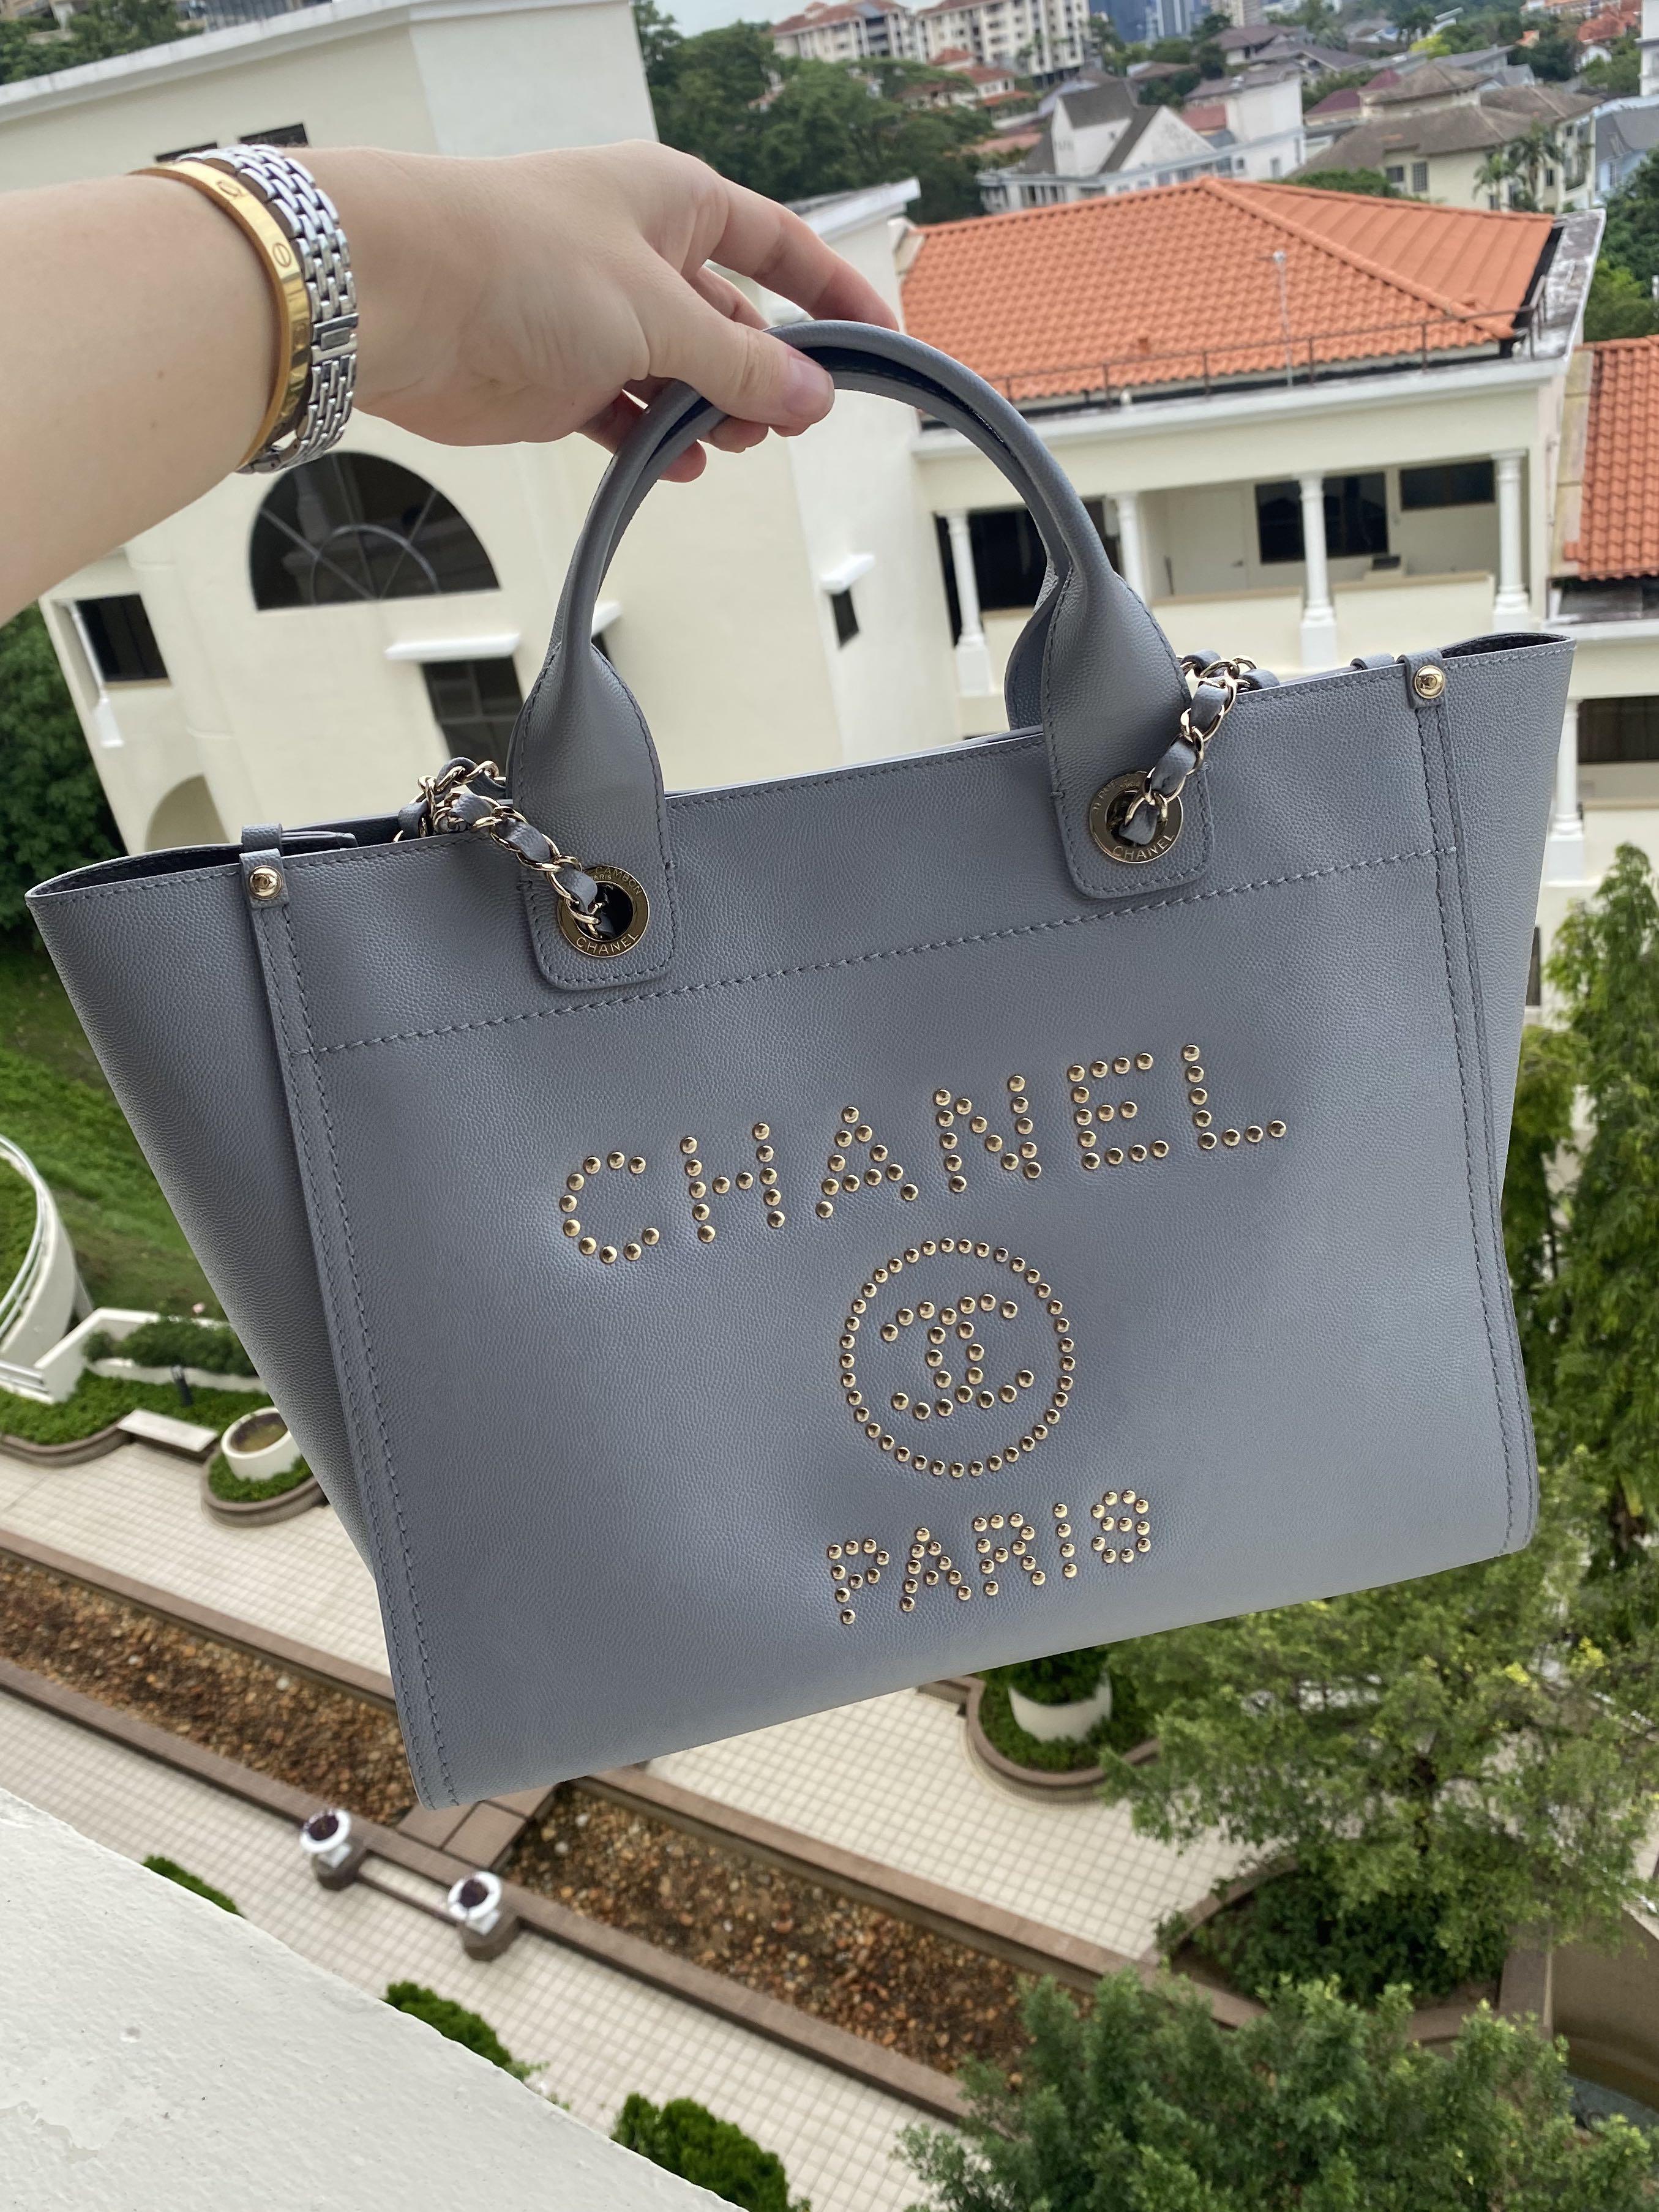 CHANEL, Bags, Chanel Deauville Grey Tote Bag